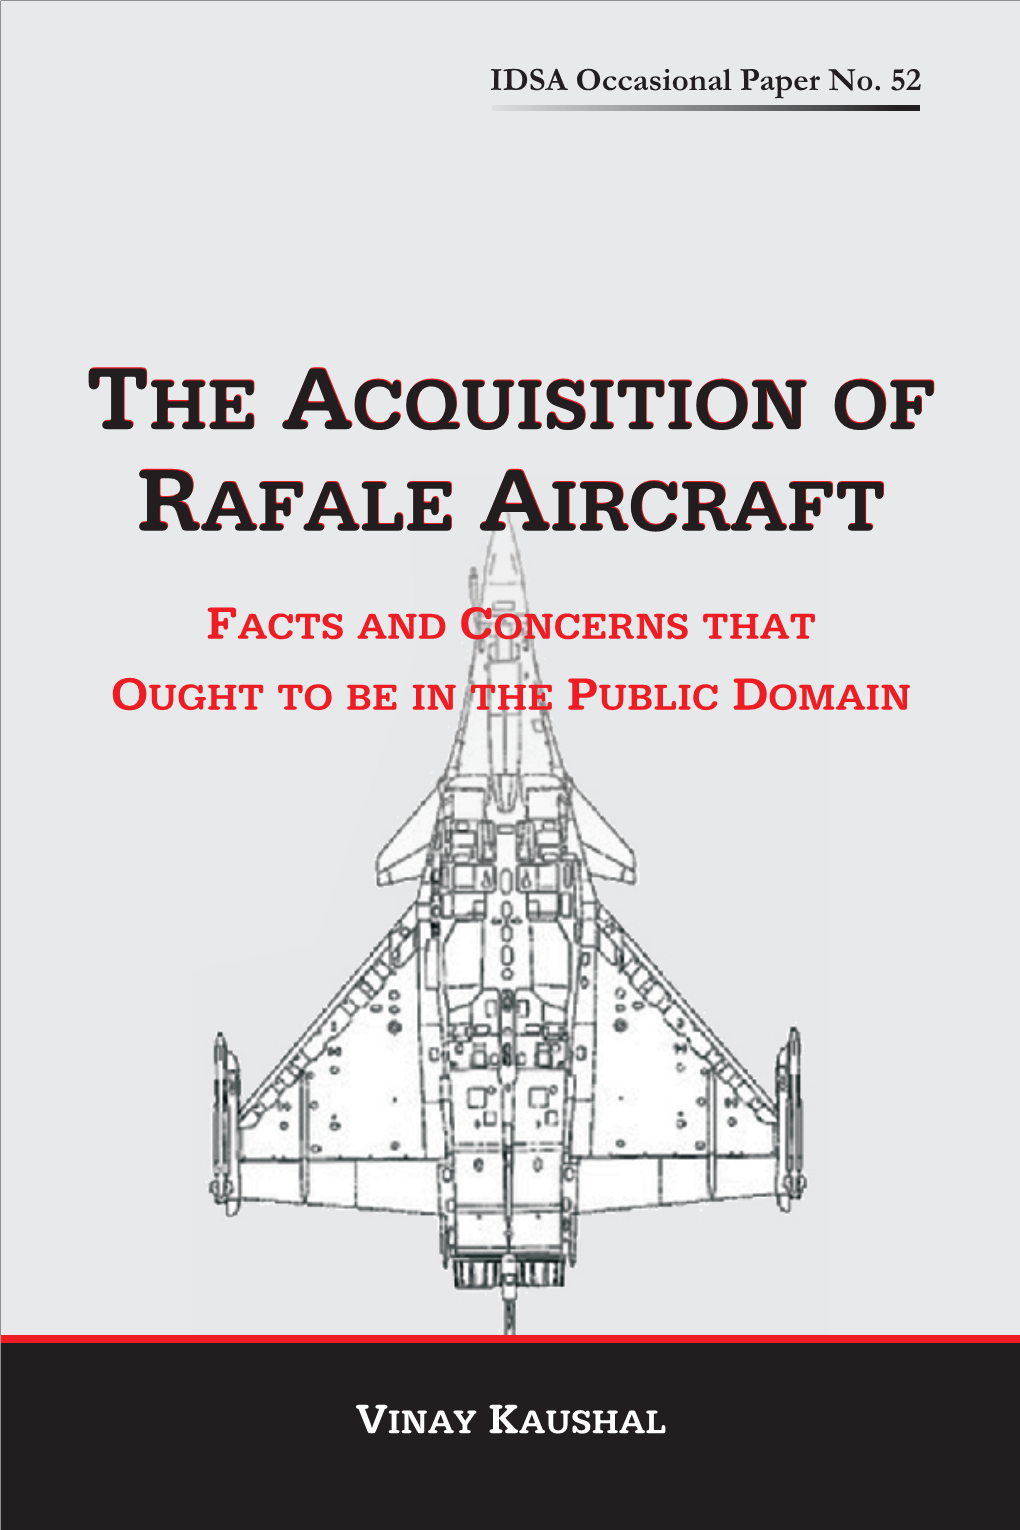 Acquisition-Of-Rafale-Aircraft-Op-52.Pdf